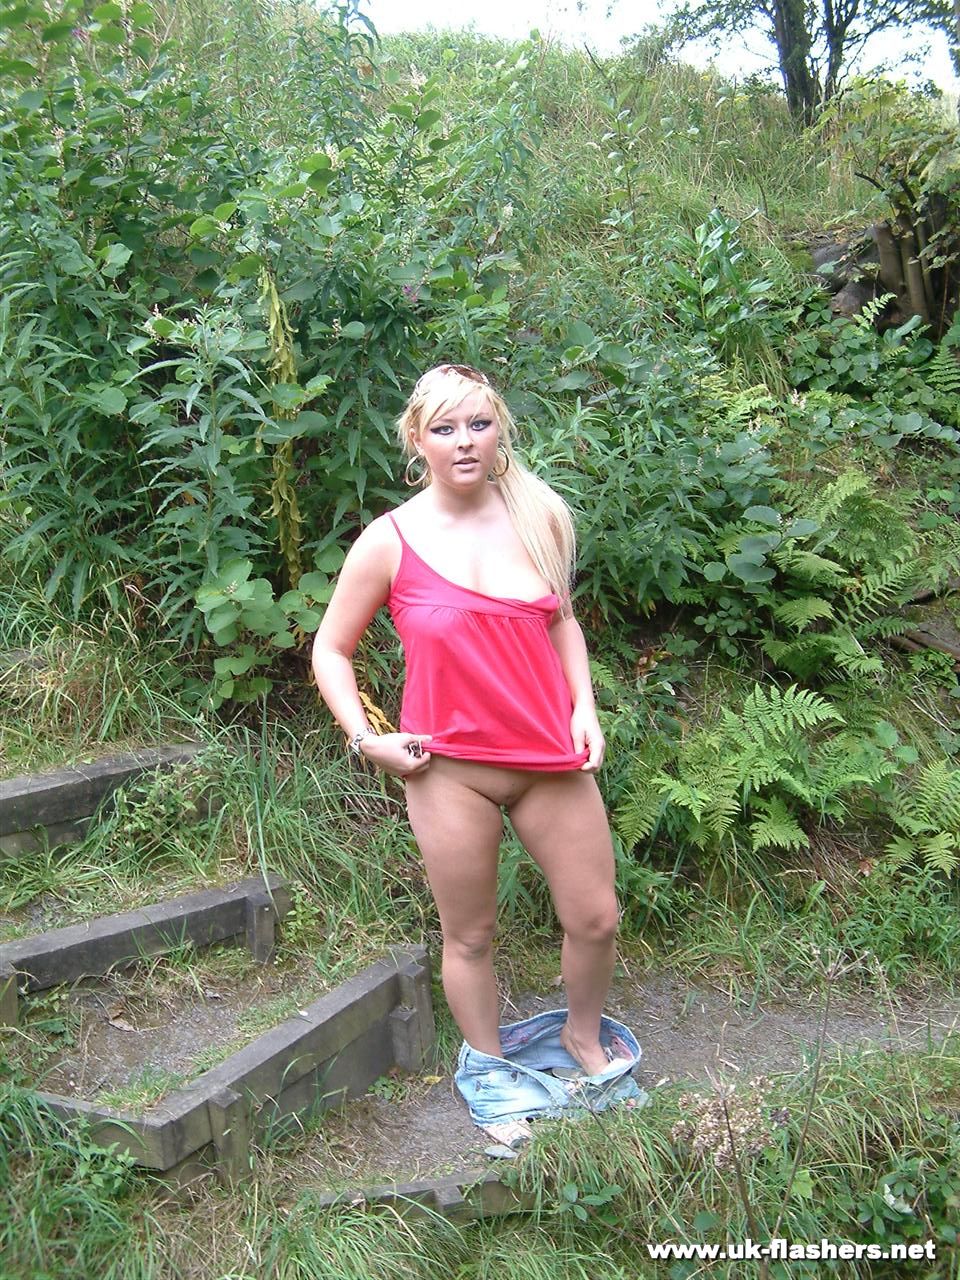 Overweight UK female with blonde hair strips naked on a popular walking trails foto porno #428197332 | UK Flashers Pics, Lena Leigh, Public, porno ponsel